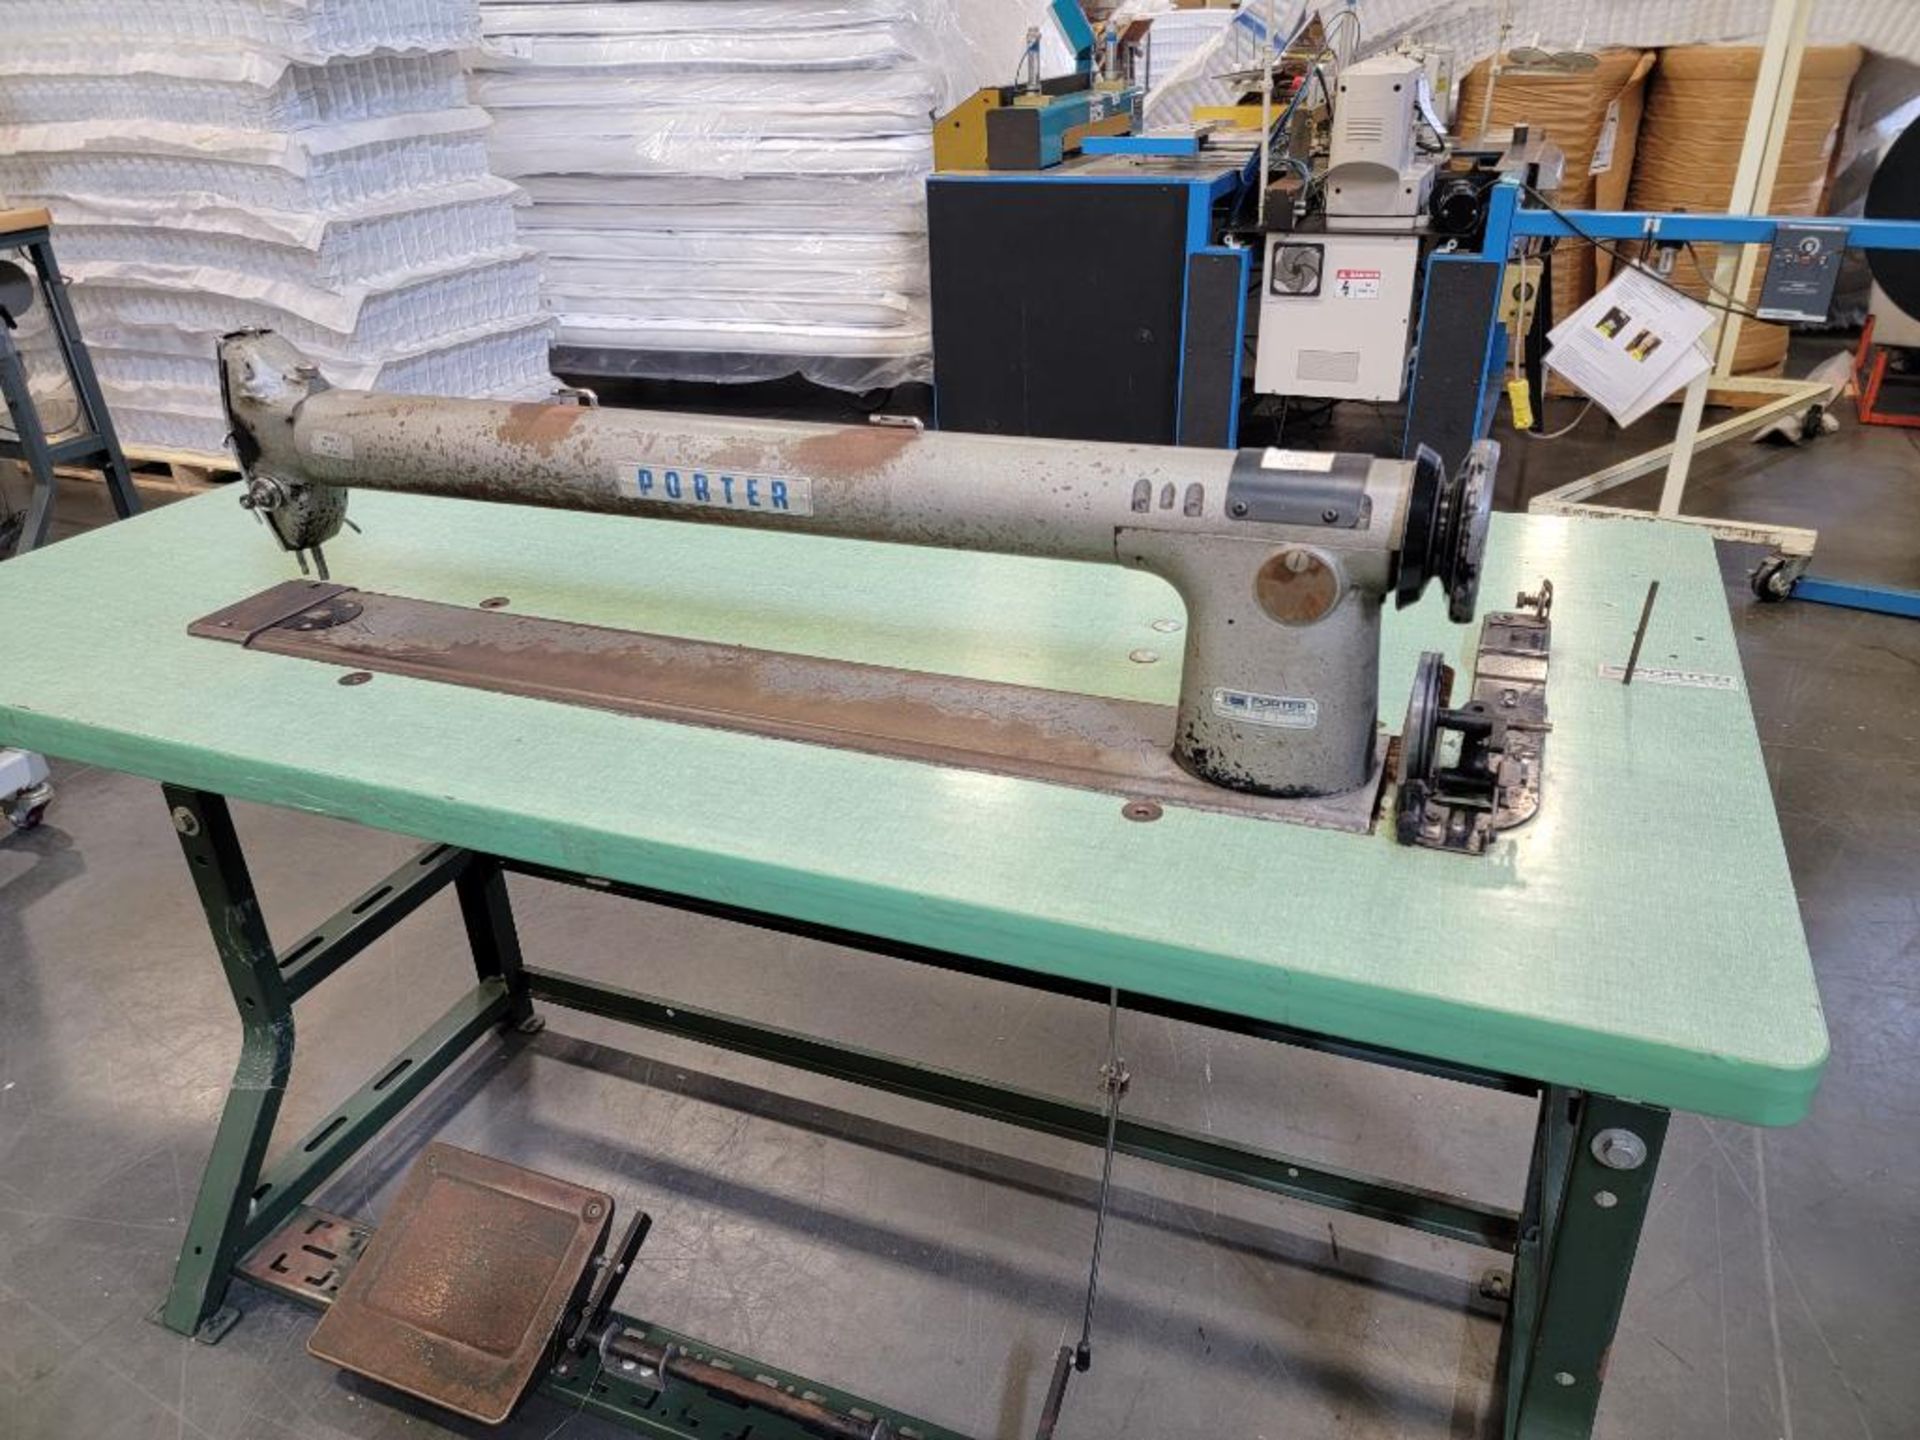 Porter Long Arm Sewing Machine, Model POO30, S/N 2095, with Table and Servo Motor